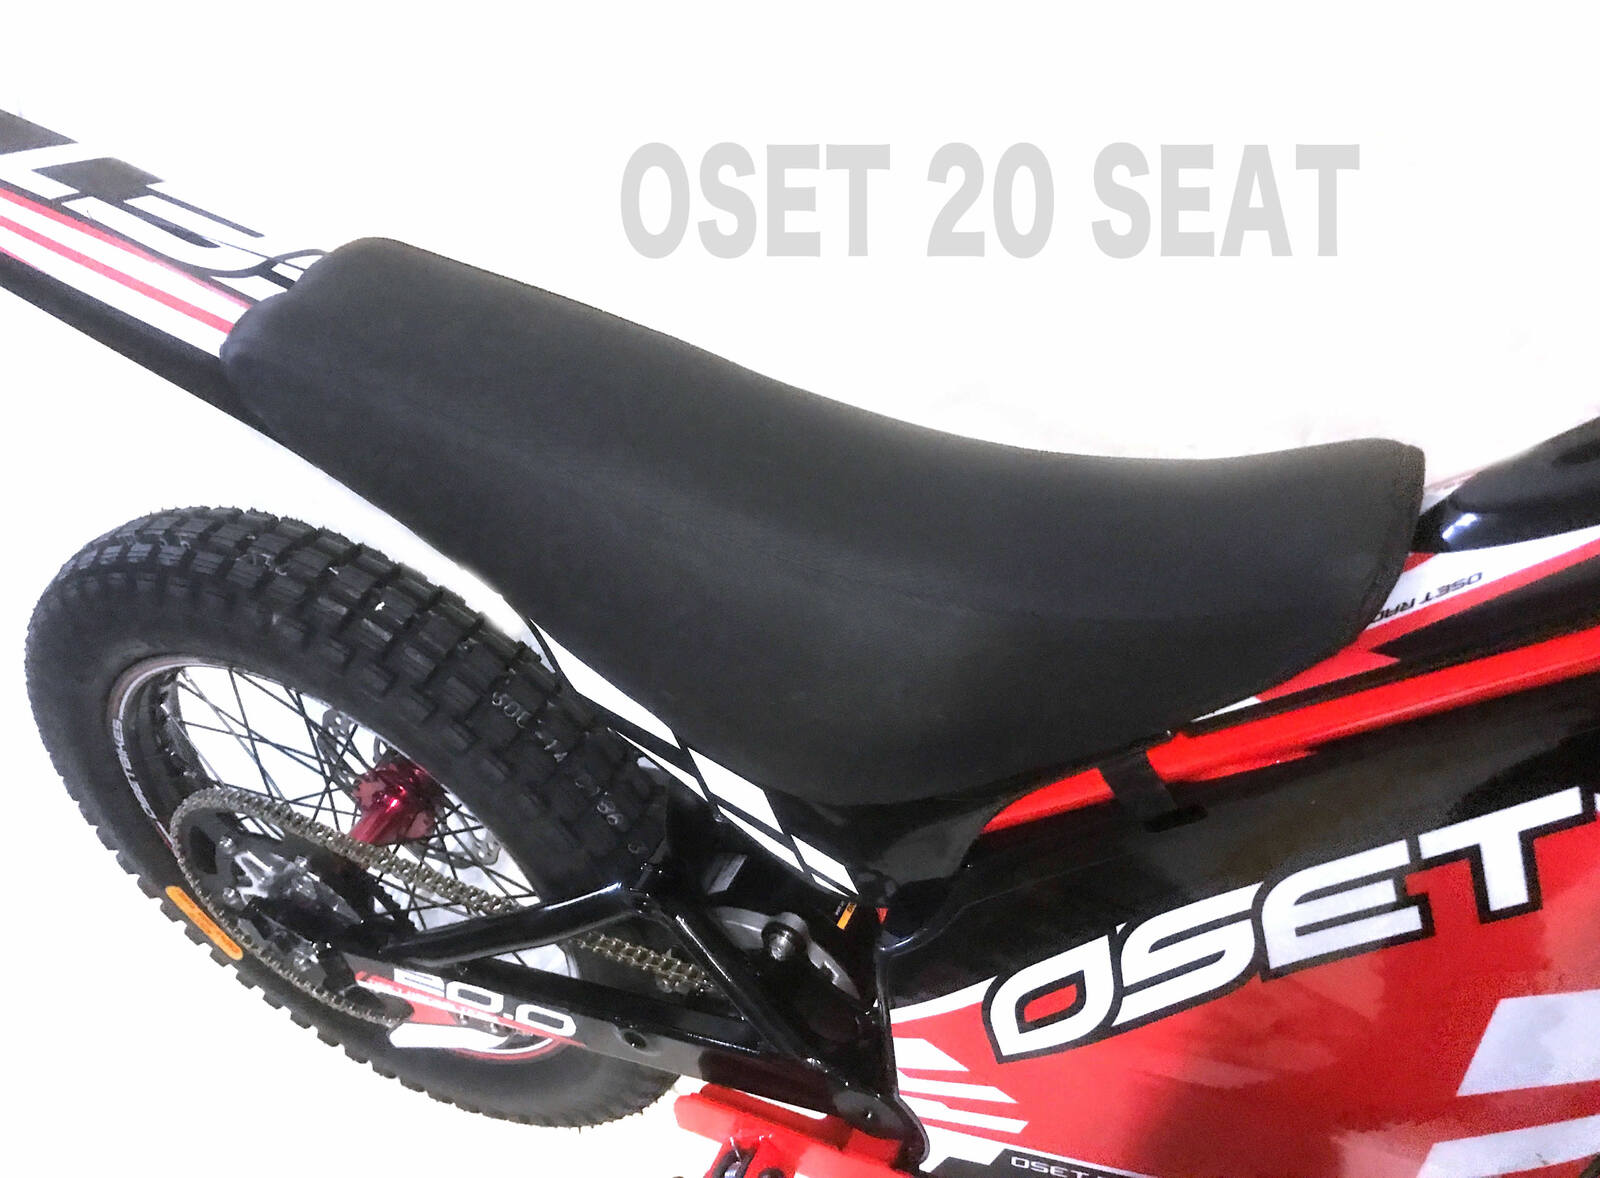 Copy of Seat - padded to Suit Oset 20" - Electric Dirt Bikes